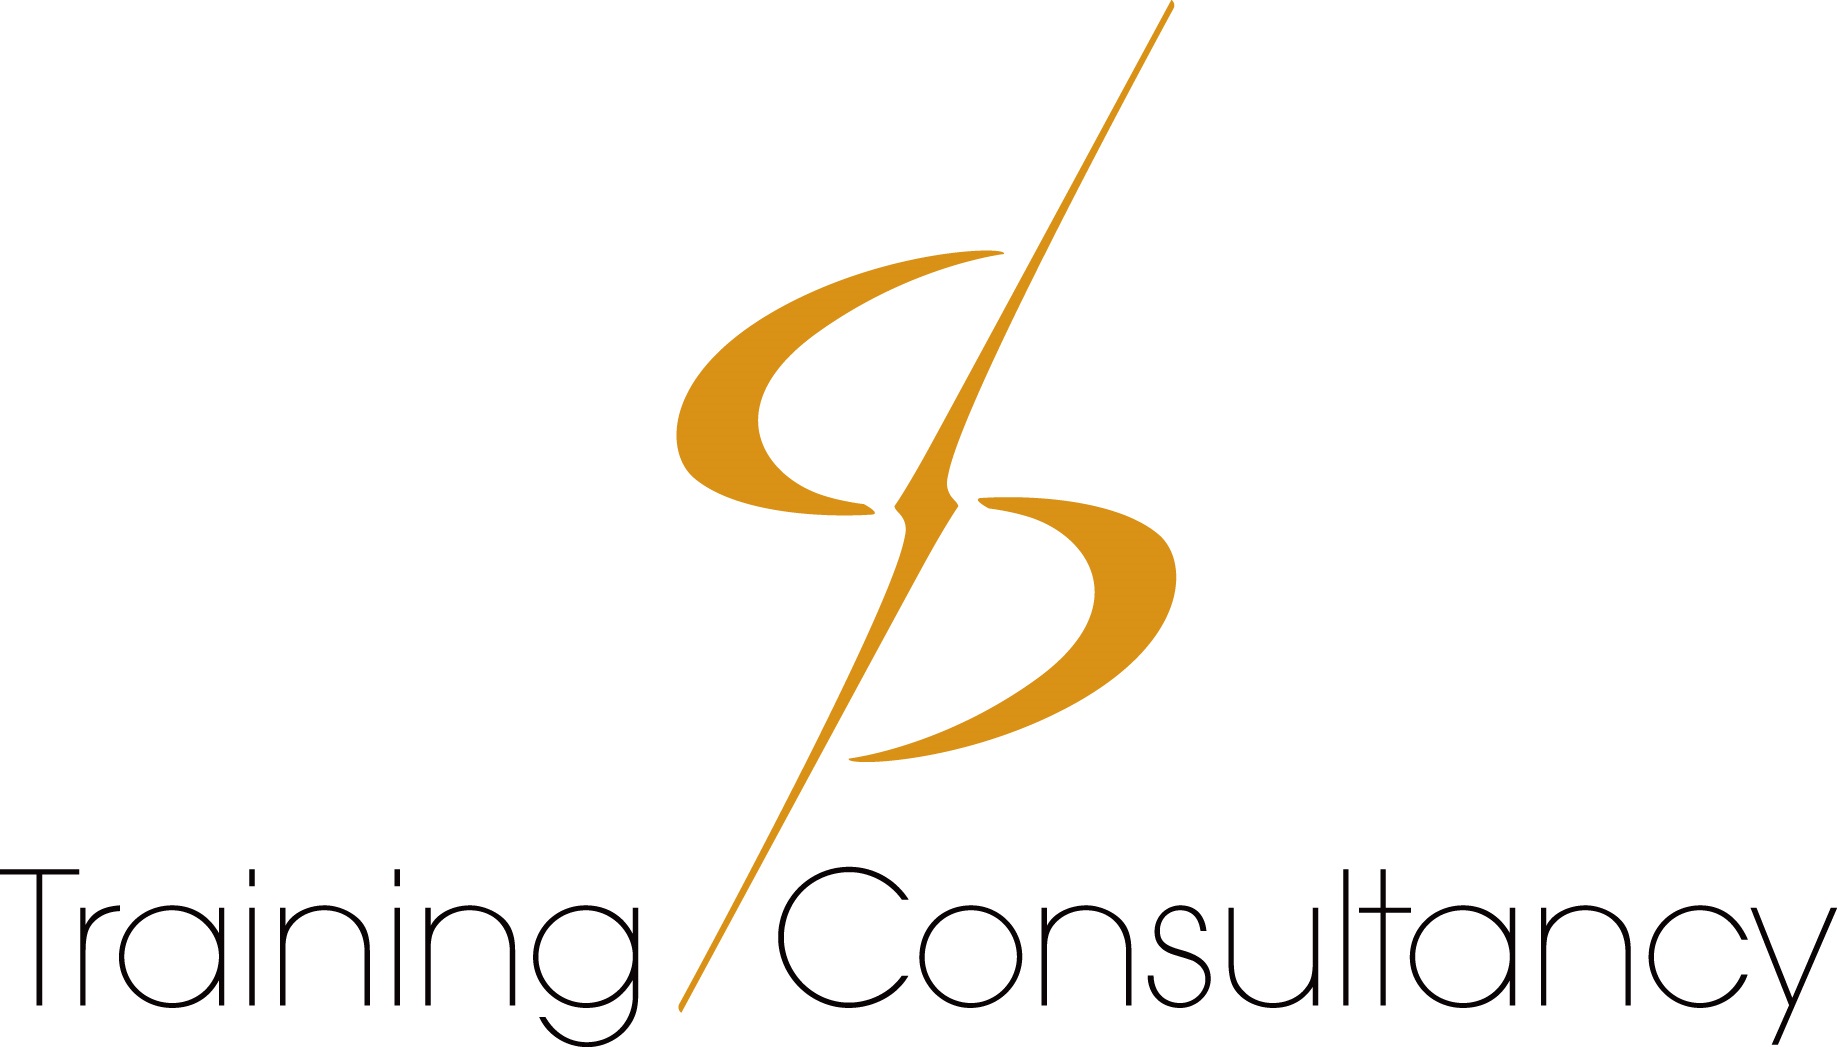 Developing Personnel Training & Consultancy